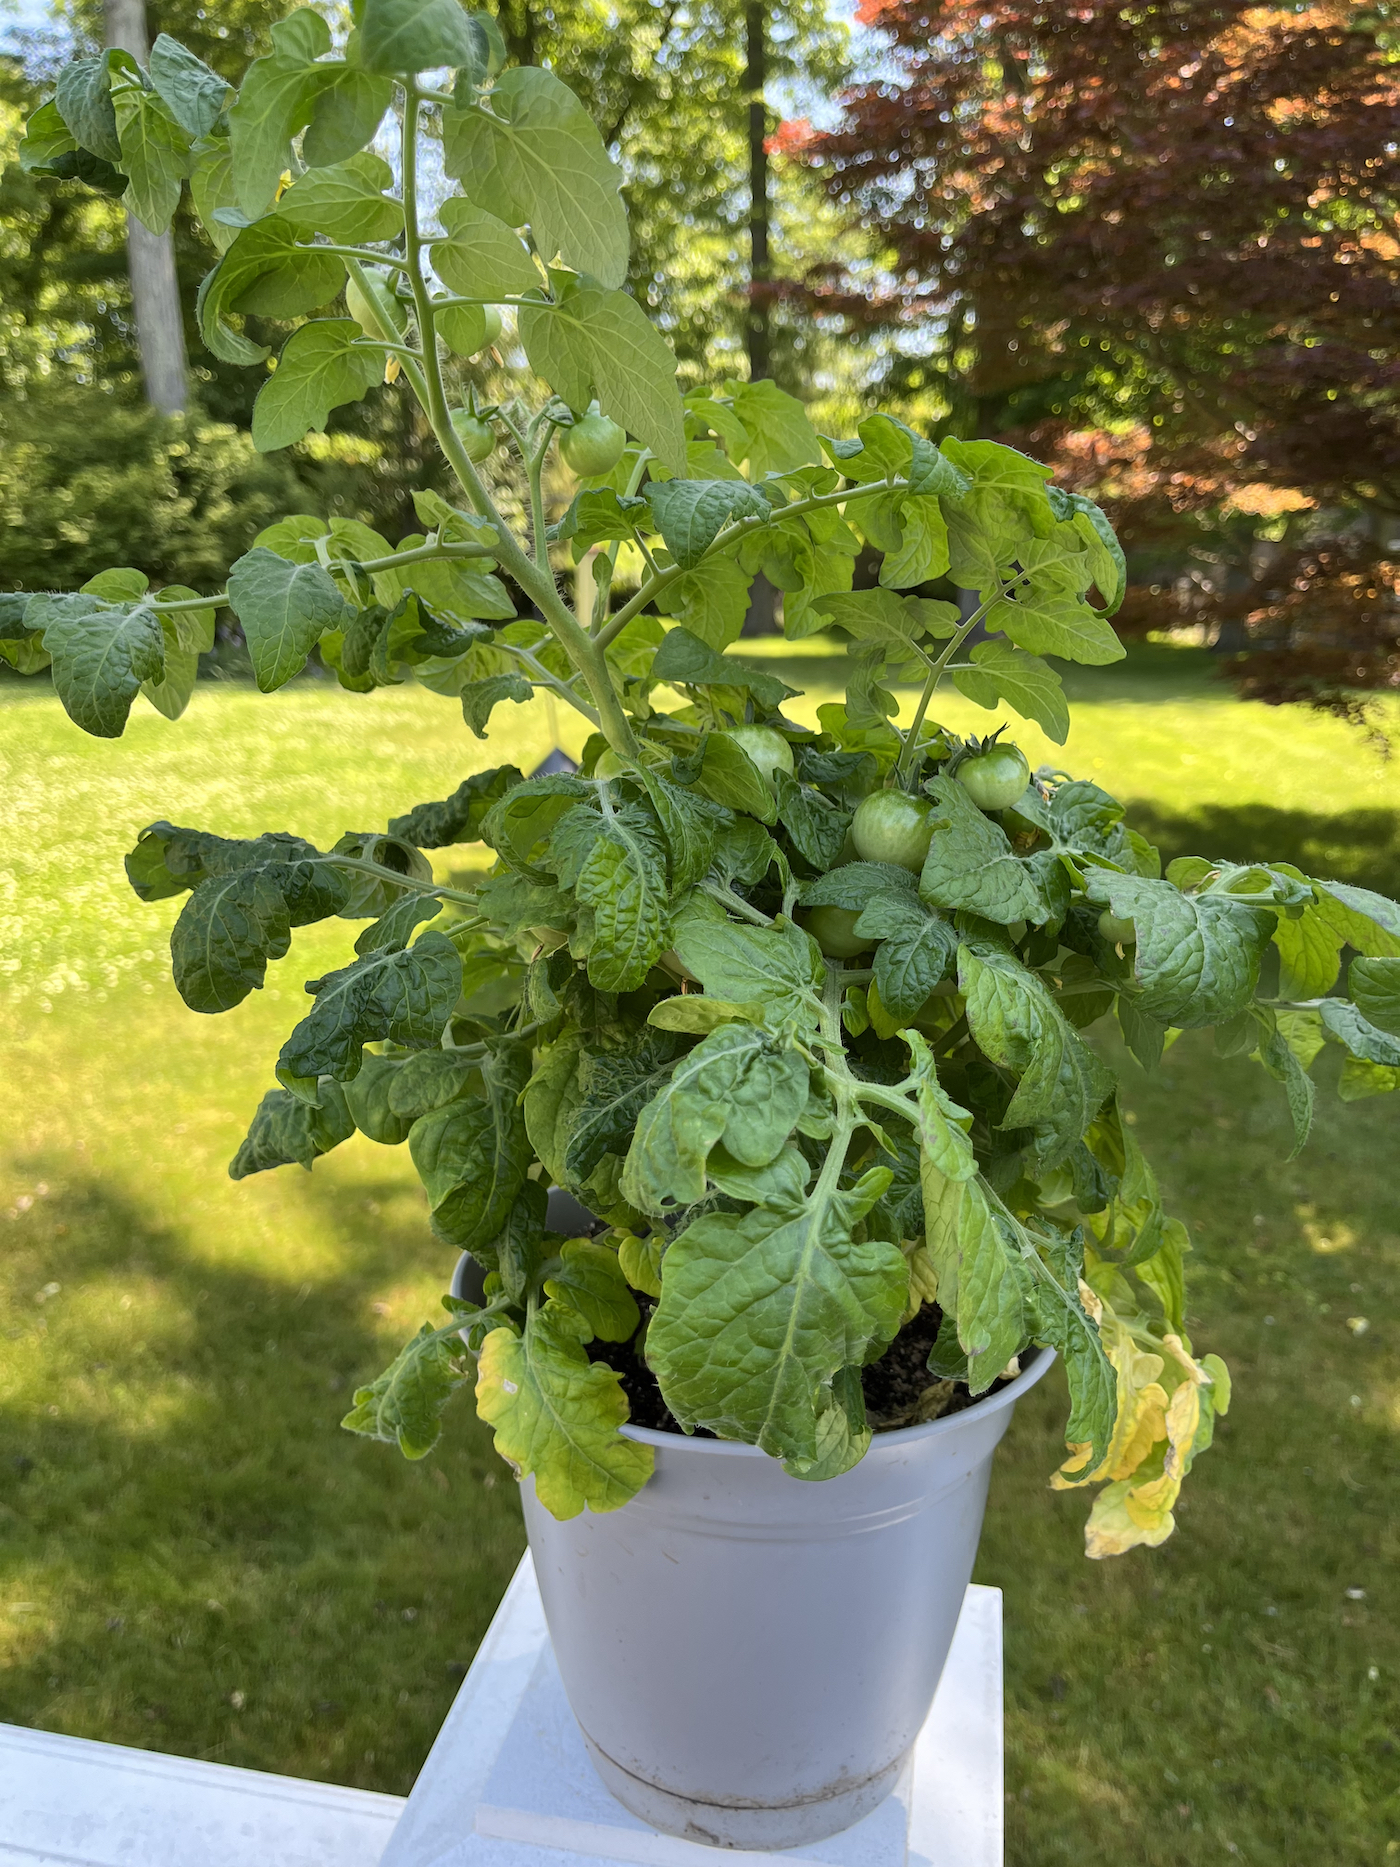 A potted plant covered in lush leaves and green tomatoes.